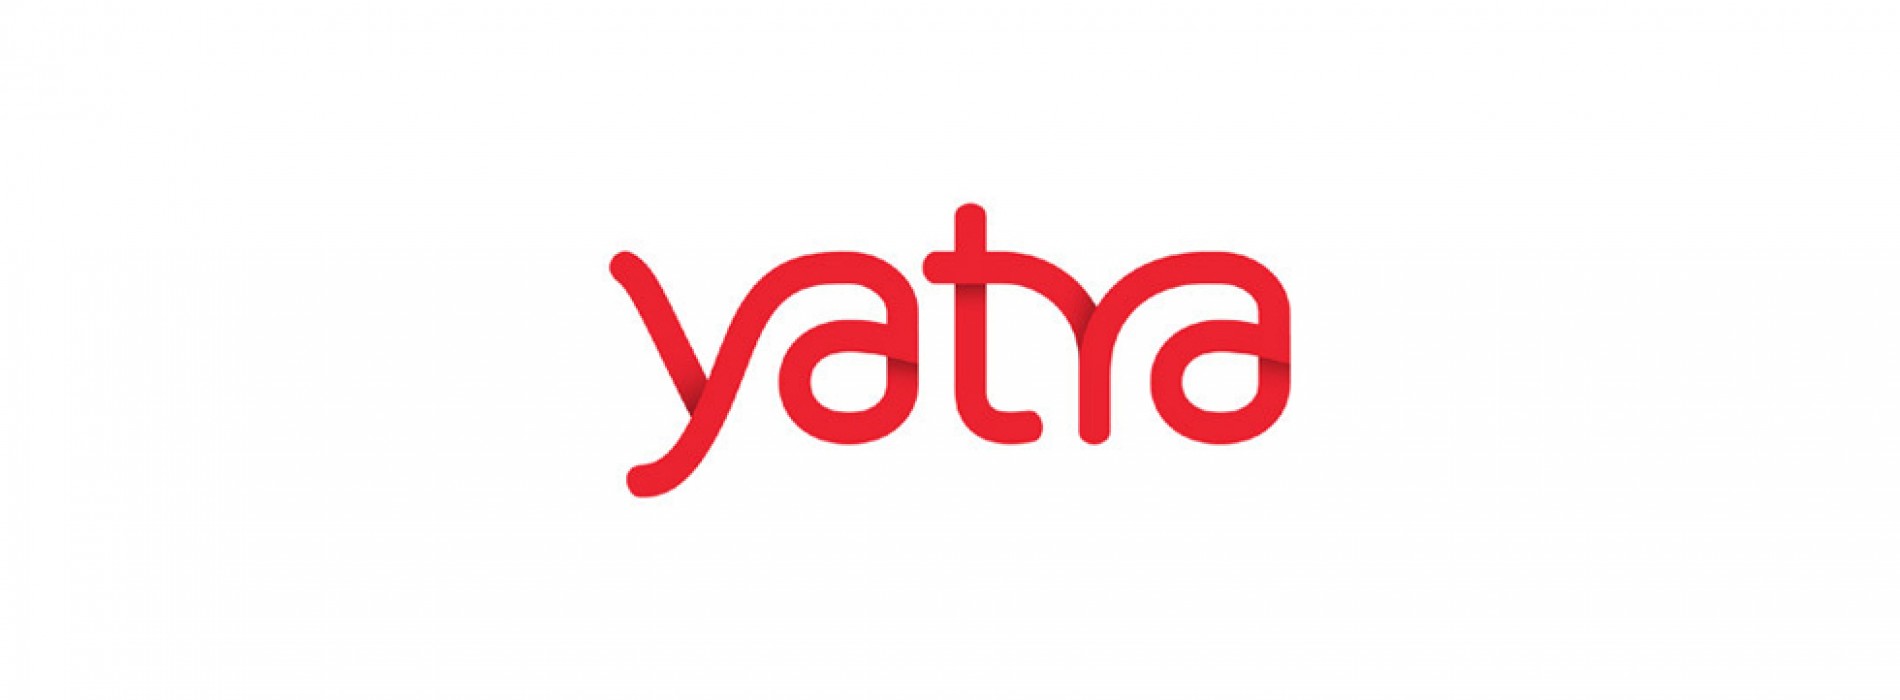 How to Successfully Sell Through Yatra?